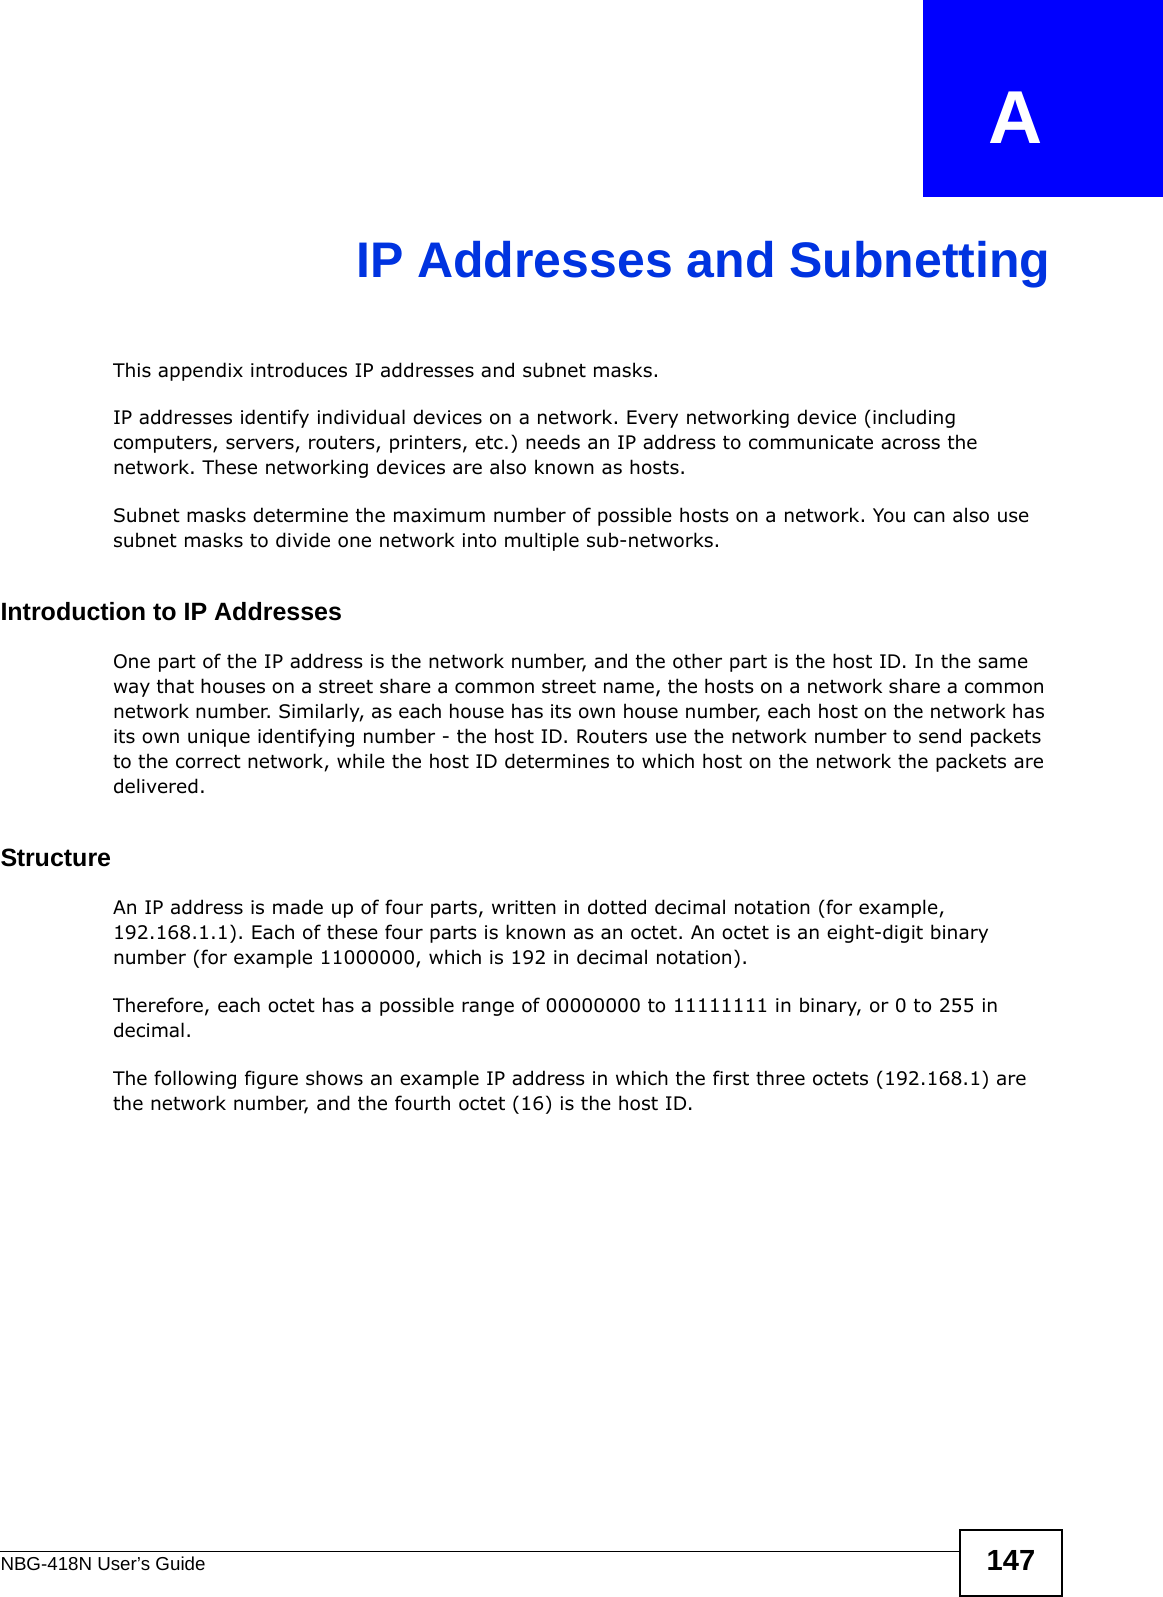 NBG-418N User’s Guide 147APPENDIX   AIP Addresses and SubnettingThis appendix introduces IP addresses and subnet masks. IP addresses identify individual devices on a network. Every networking device (including computers, servers, routers, printers, etc.) needs an IP address to communicate across the network. These networking devices are also known as hosts.Subnet masks determine the maximum number of possible hosts on a network. You can also use subnet masks to divide one network into multiple sub-networks.Introduction to IP AddressesOne part of the IP address is the network number, and the other part is the host ID. In the same way that houses on a street share a common street name, the hosts on a network share a common network number. Similarly, as each house has its own house number, each host on the network has its own unique identifying number - the host ID. Routers use the network number to send packets to the correct network, while the host ID determines to which host on the network the packets are delivered.StructureAn IP address is made up of four parts, written in dotted decimal notation (for example, 192.168.1.1). Each of these four parts is known as an octet. An octet is an eight-digit binary number (for example 11000000, which is 192 in decimal notation). Therefore, each octet has a possible range of 00000000 to 11111111 in binary, or 0 to 255 in decimal.The following figure shows an example IP address in which the first three octets (192.168.1) are the network number, and the fourth octet (16) is the host ID.